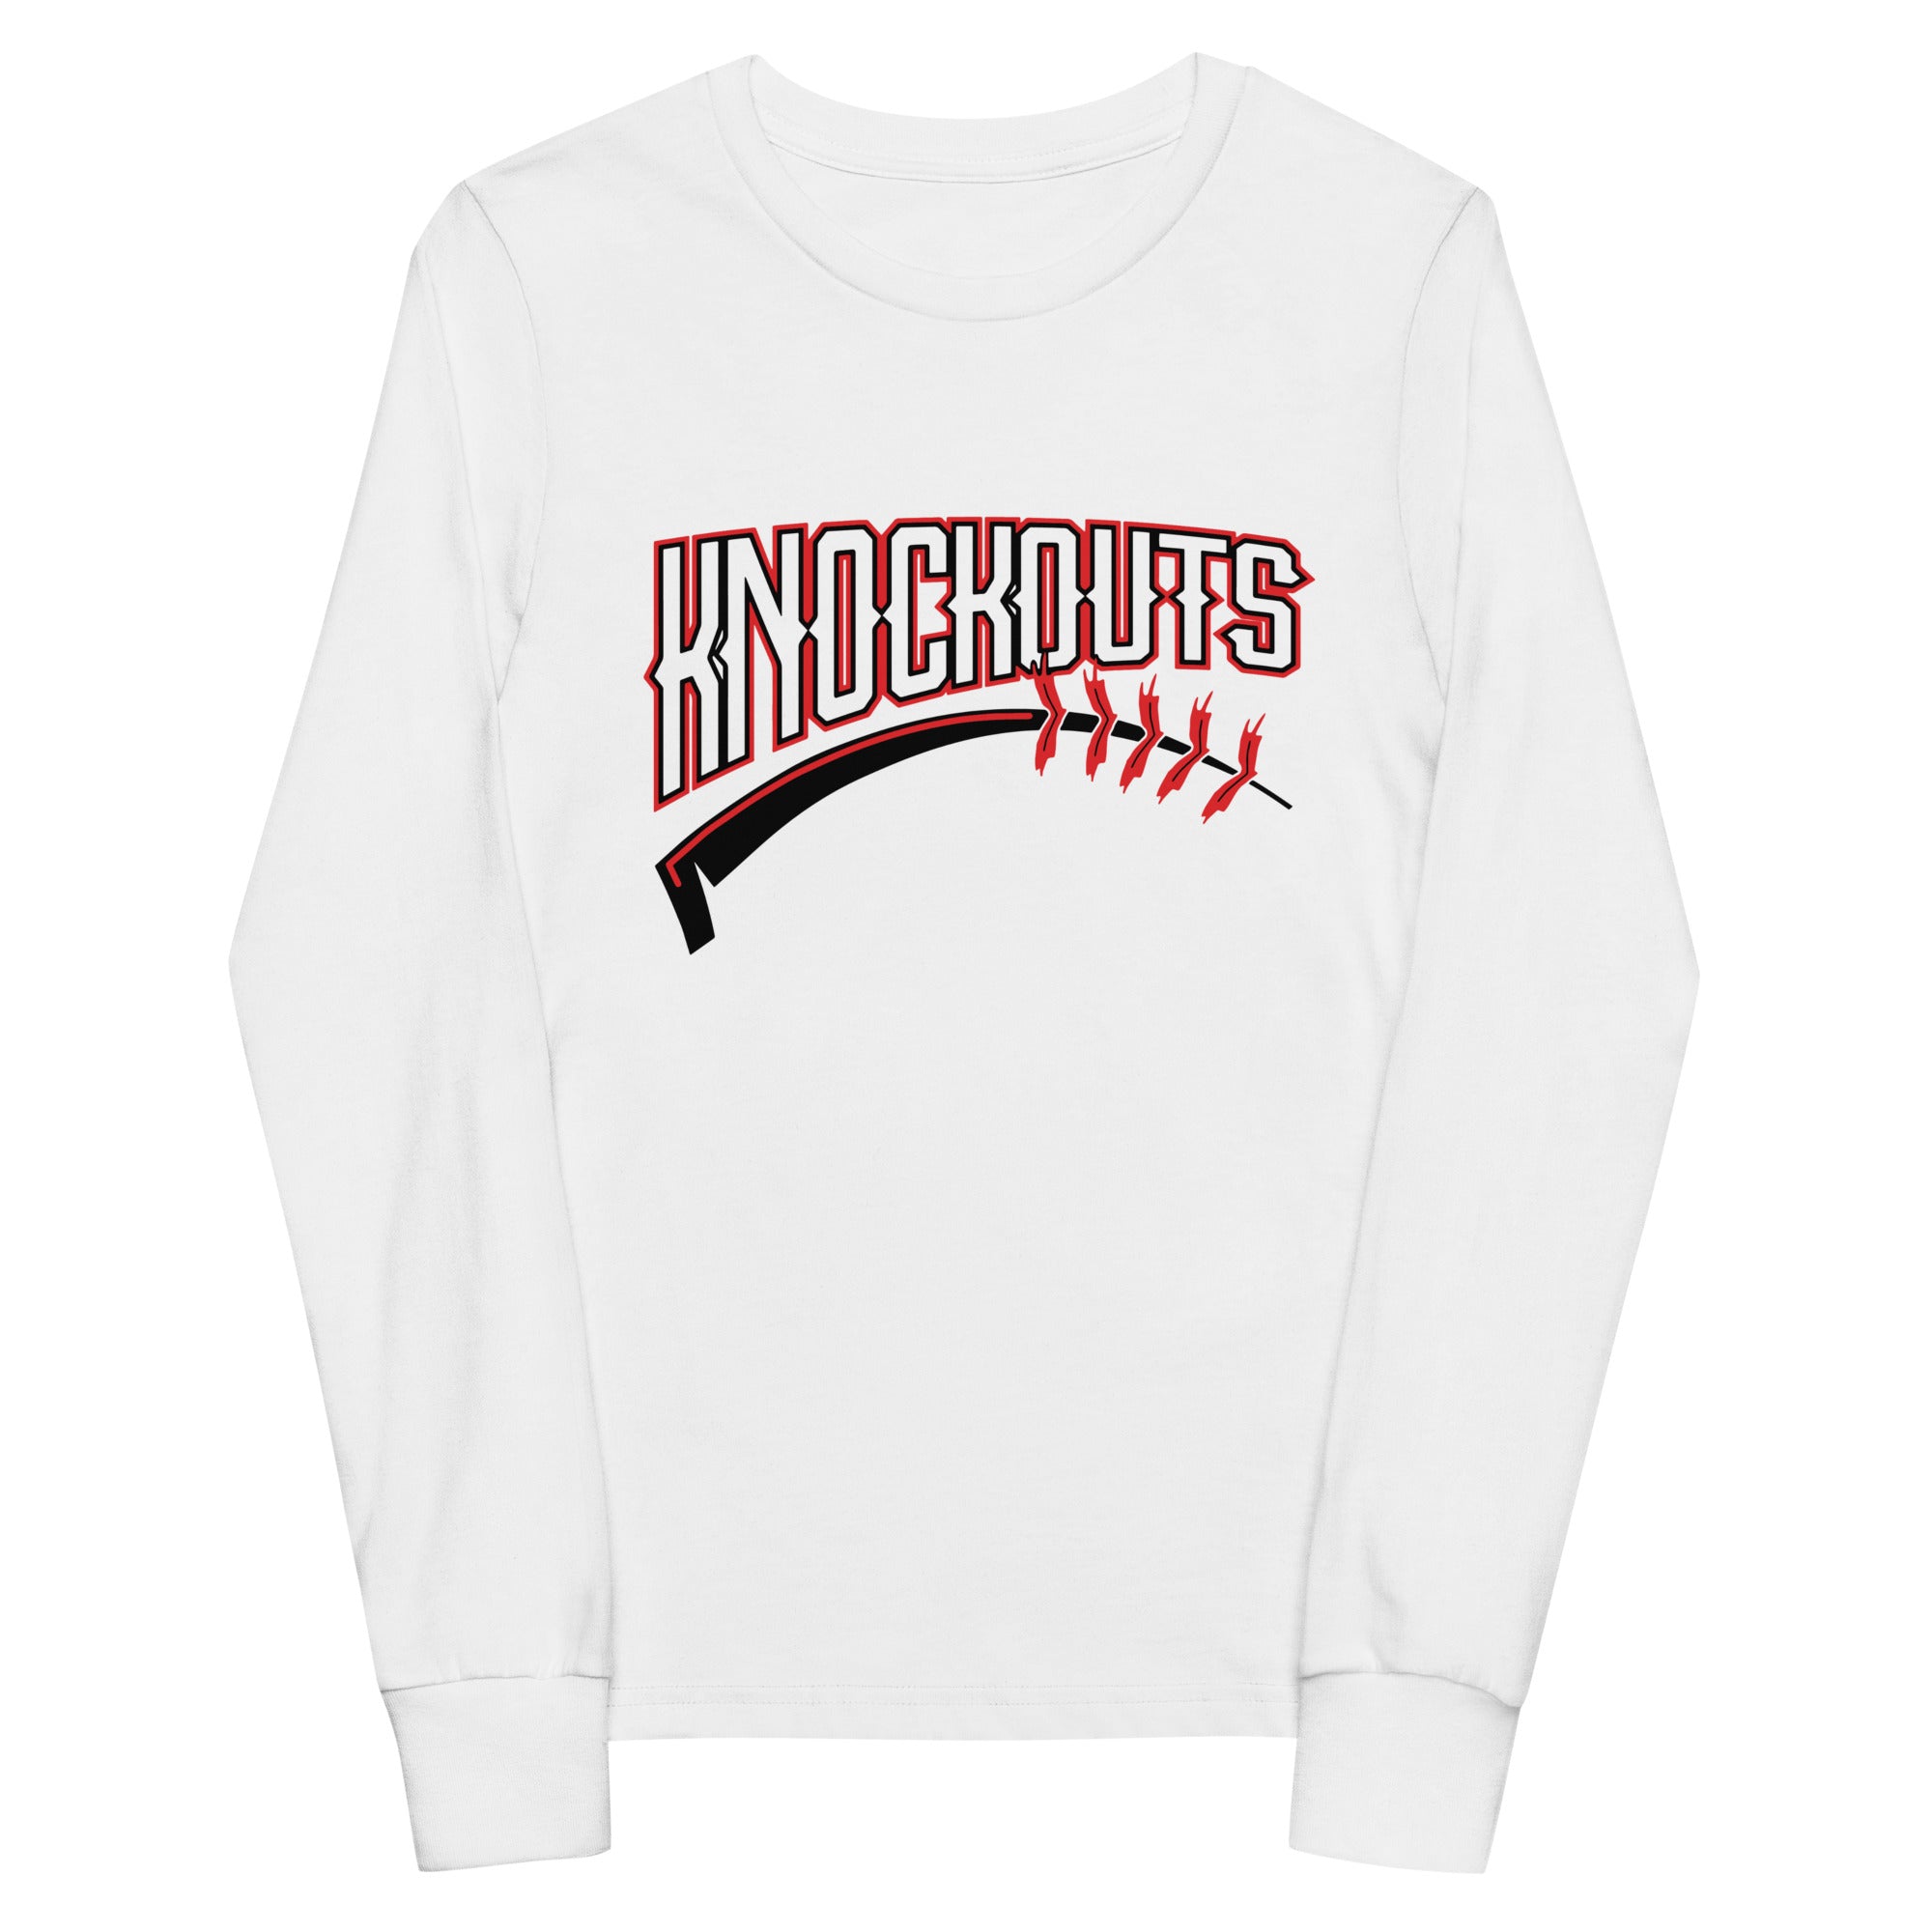 Knockouts Youth long sleeve tee